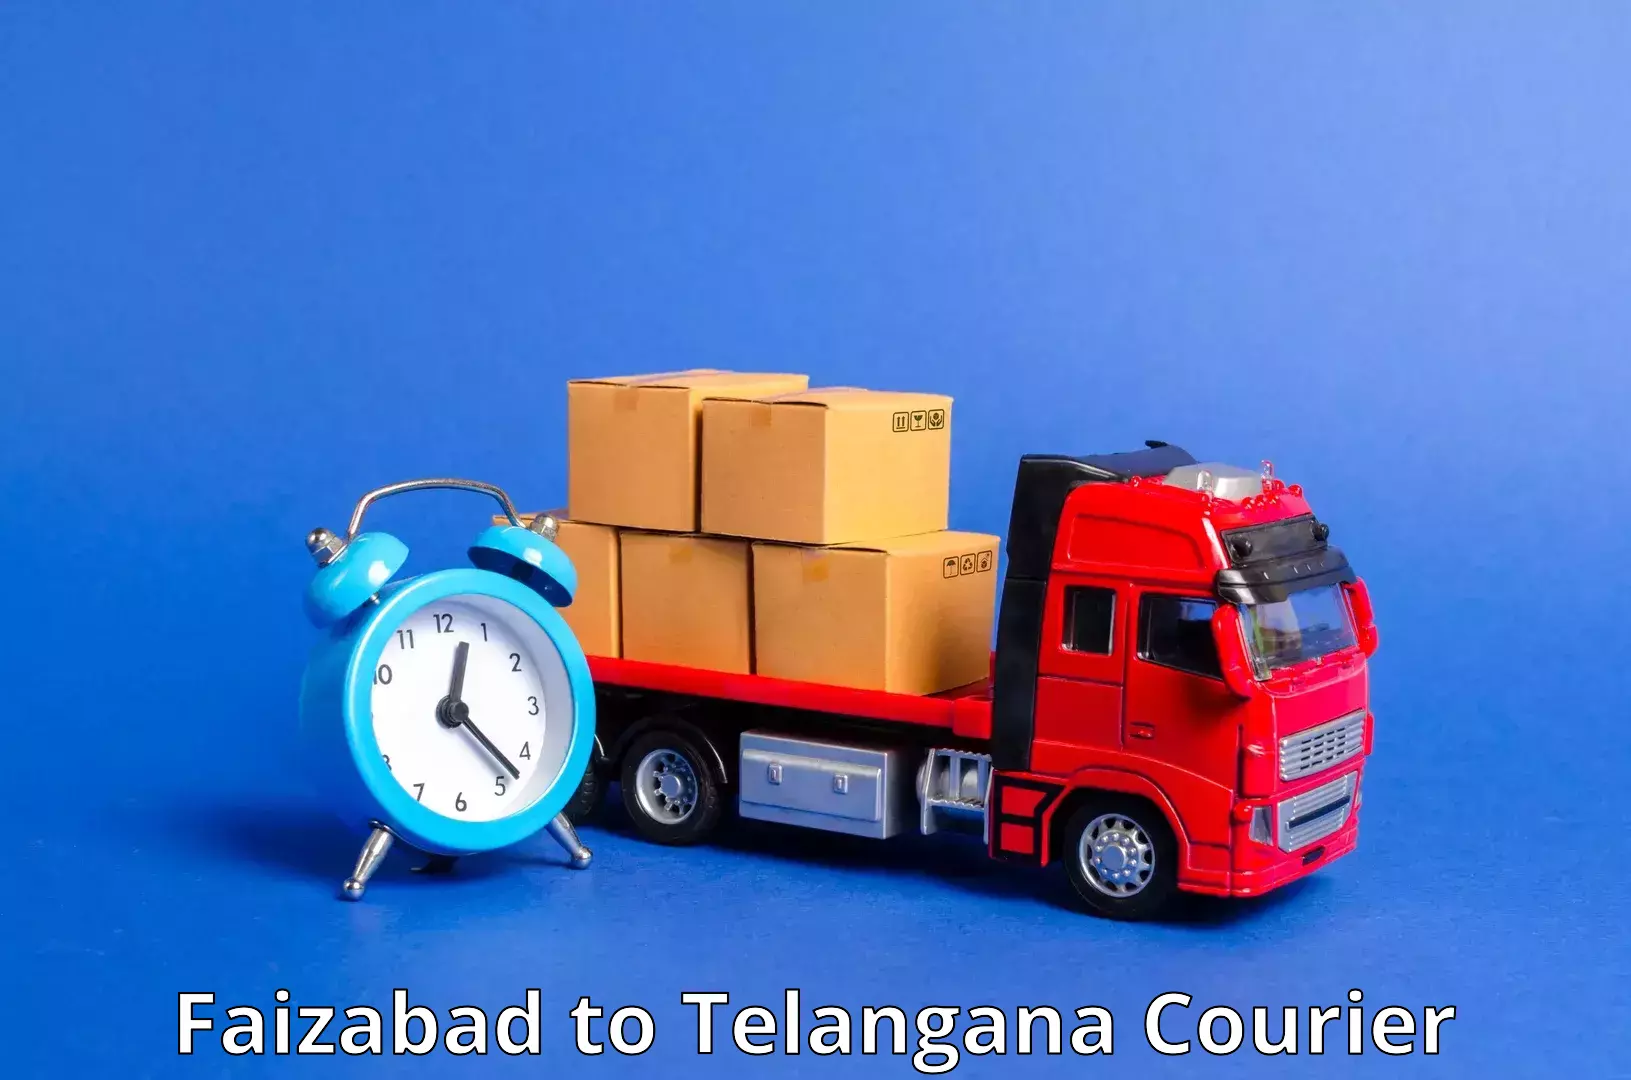 Express postal services in Faizabad to Rangareddy